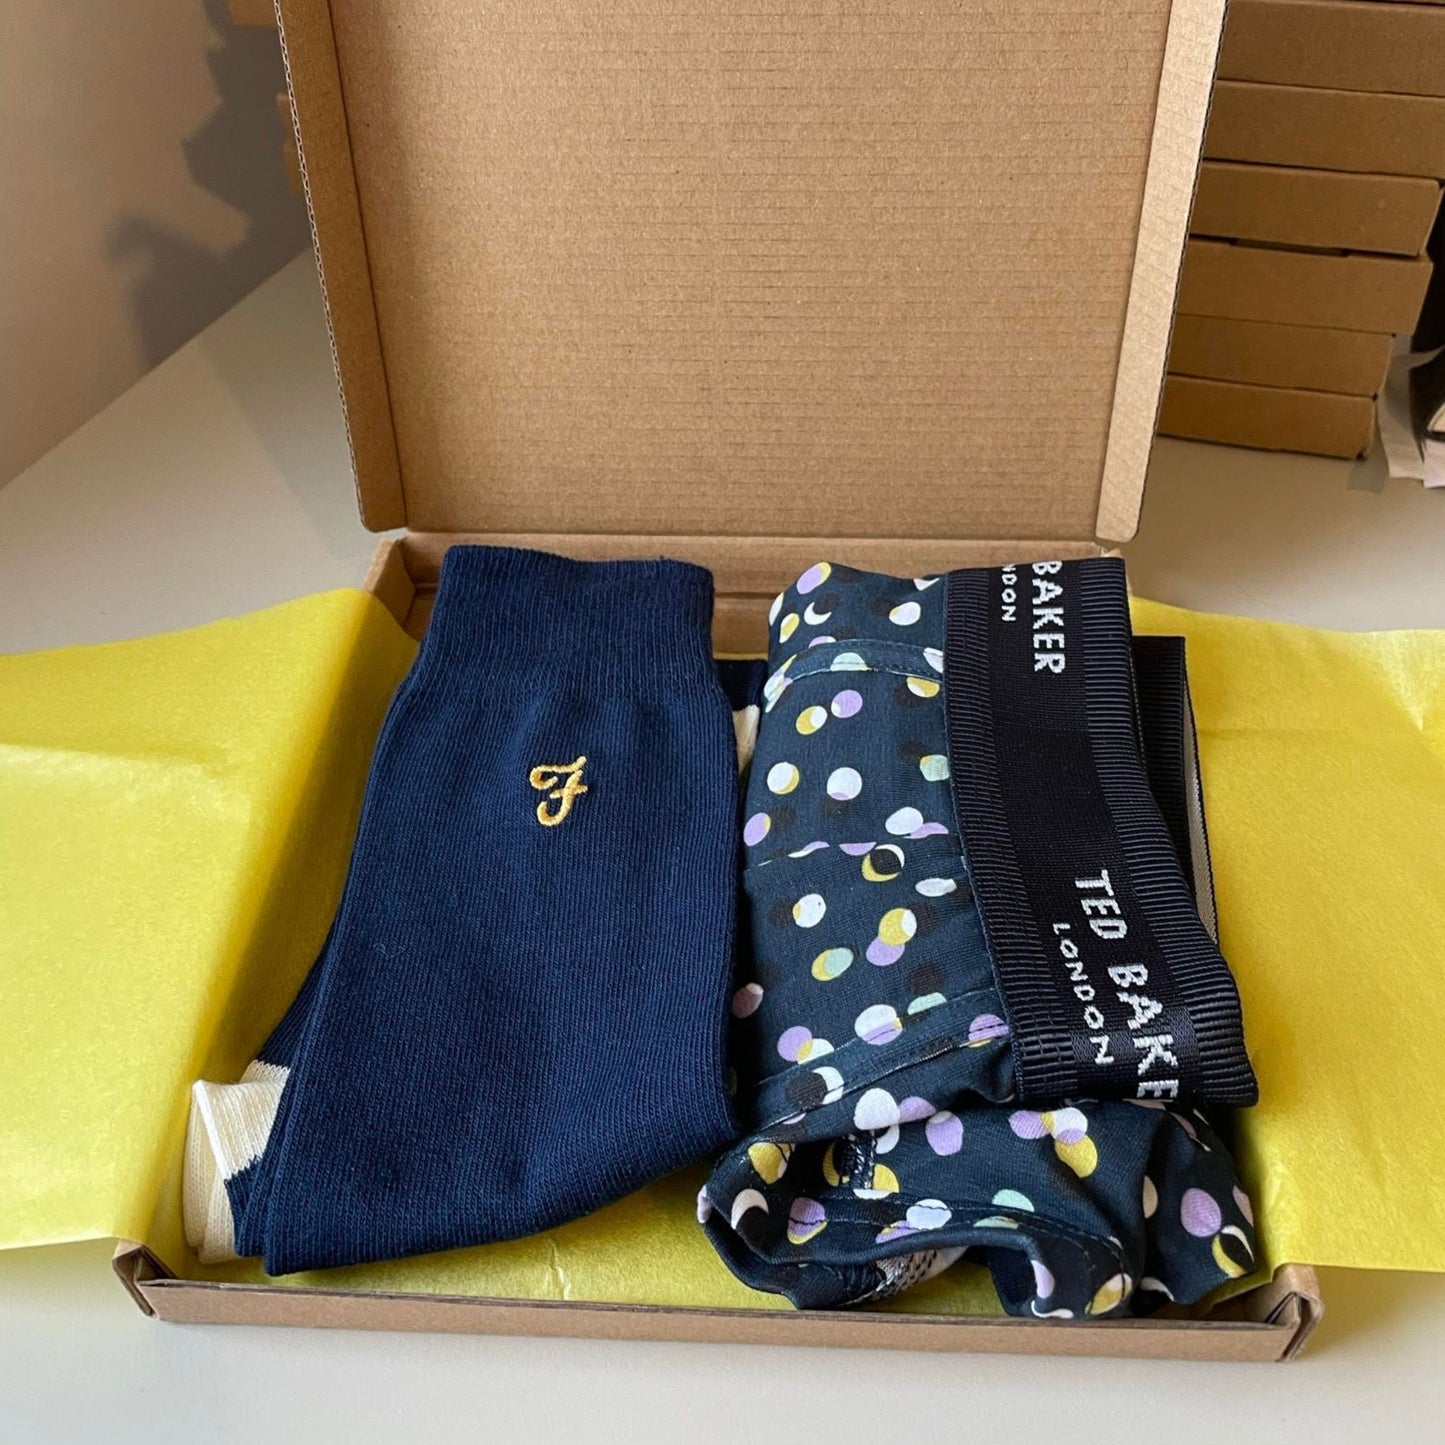 Letterbox Jox Socks & Boxers Subscription Box - 6 Month Subscription